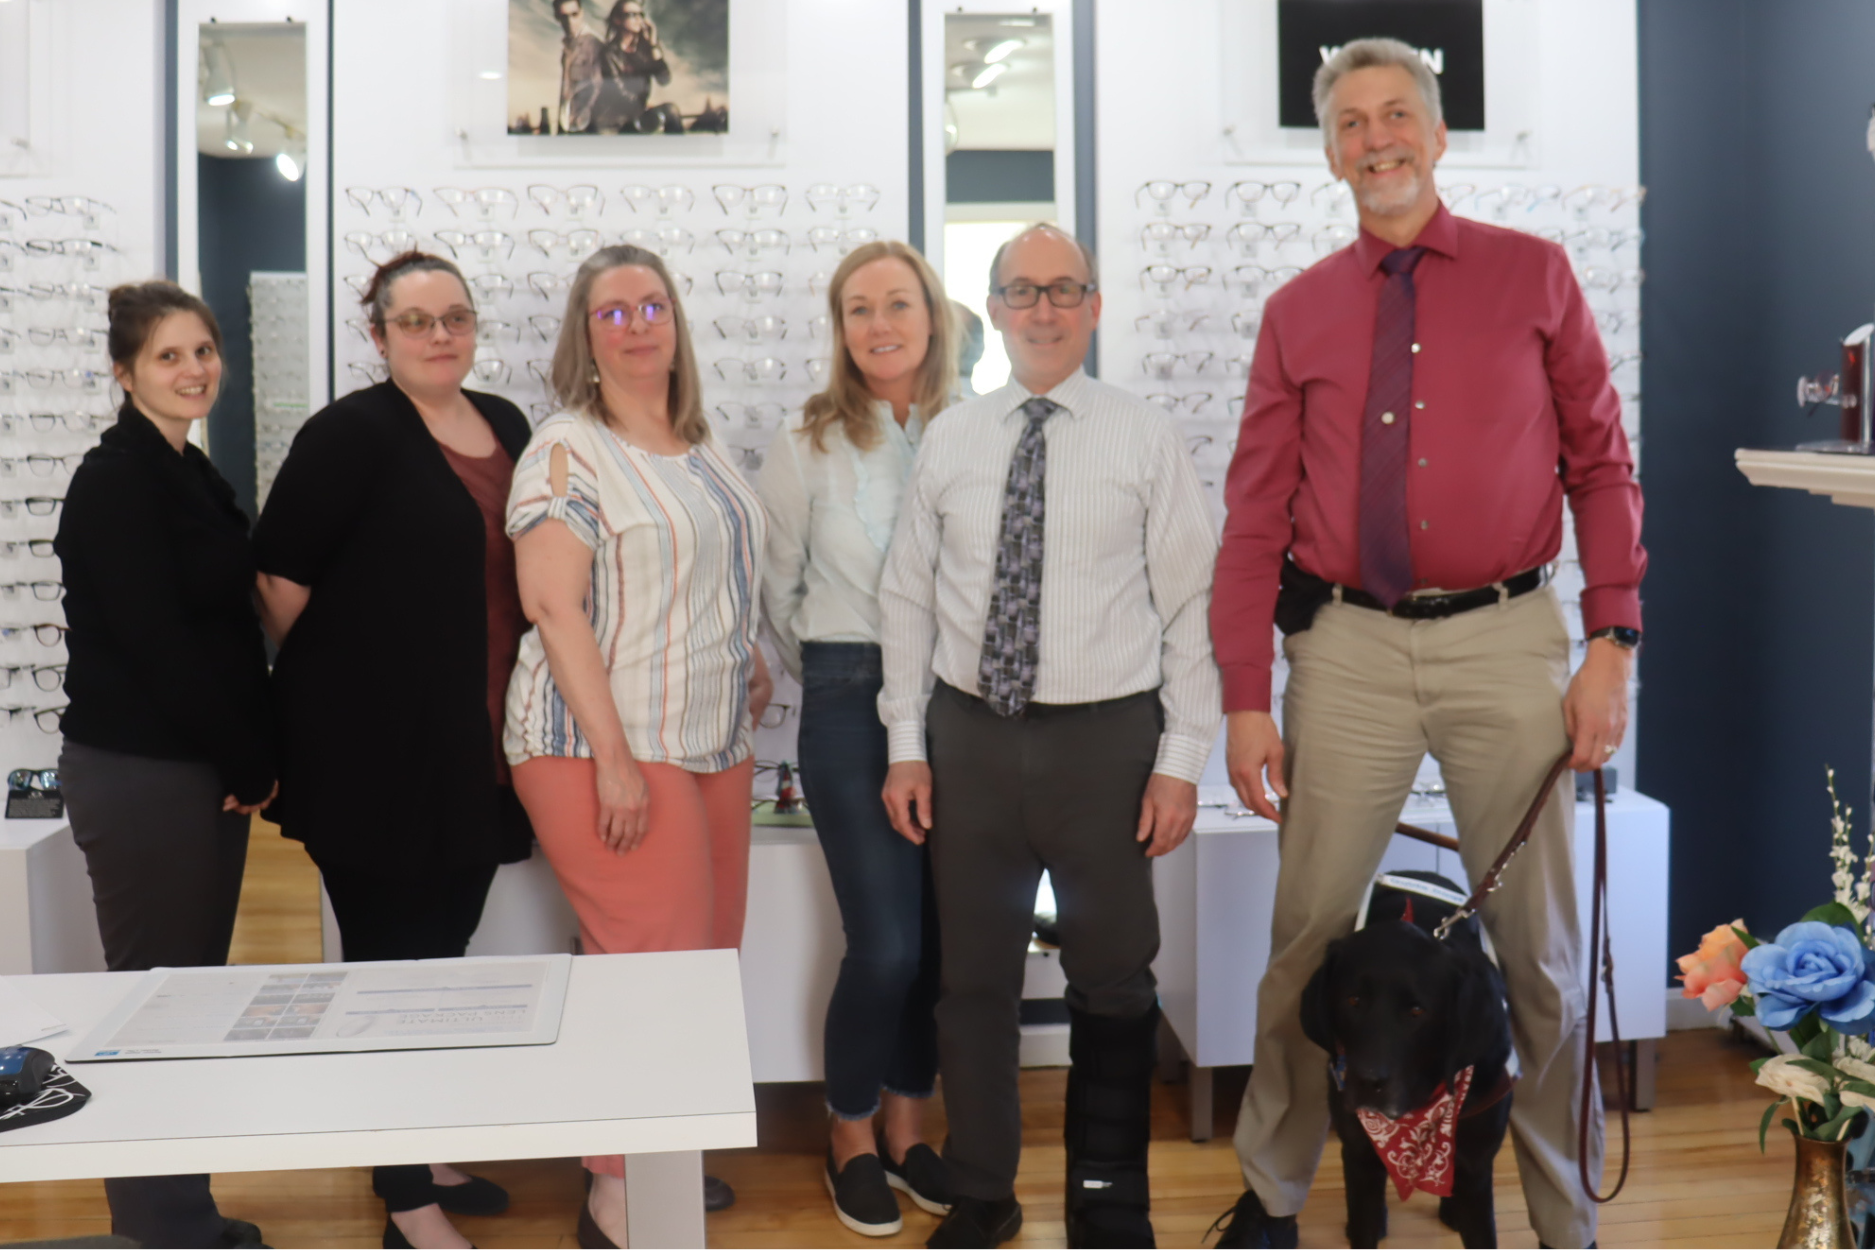 Future In Sight President & CEO Dr. Randy Pierce visiting Sacco Eyecare in Concord, NH.